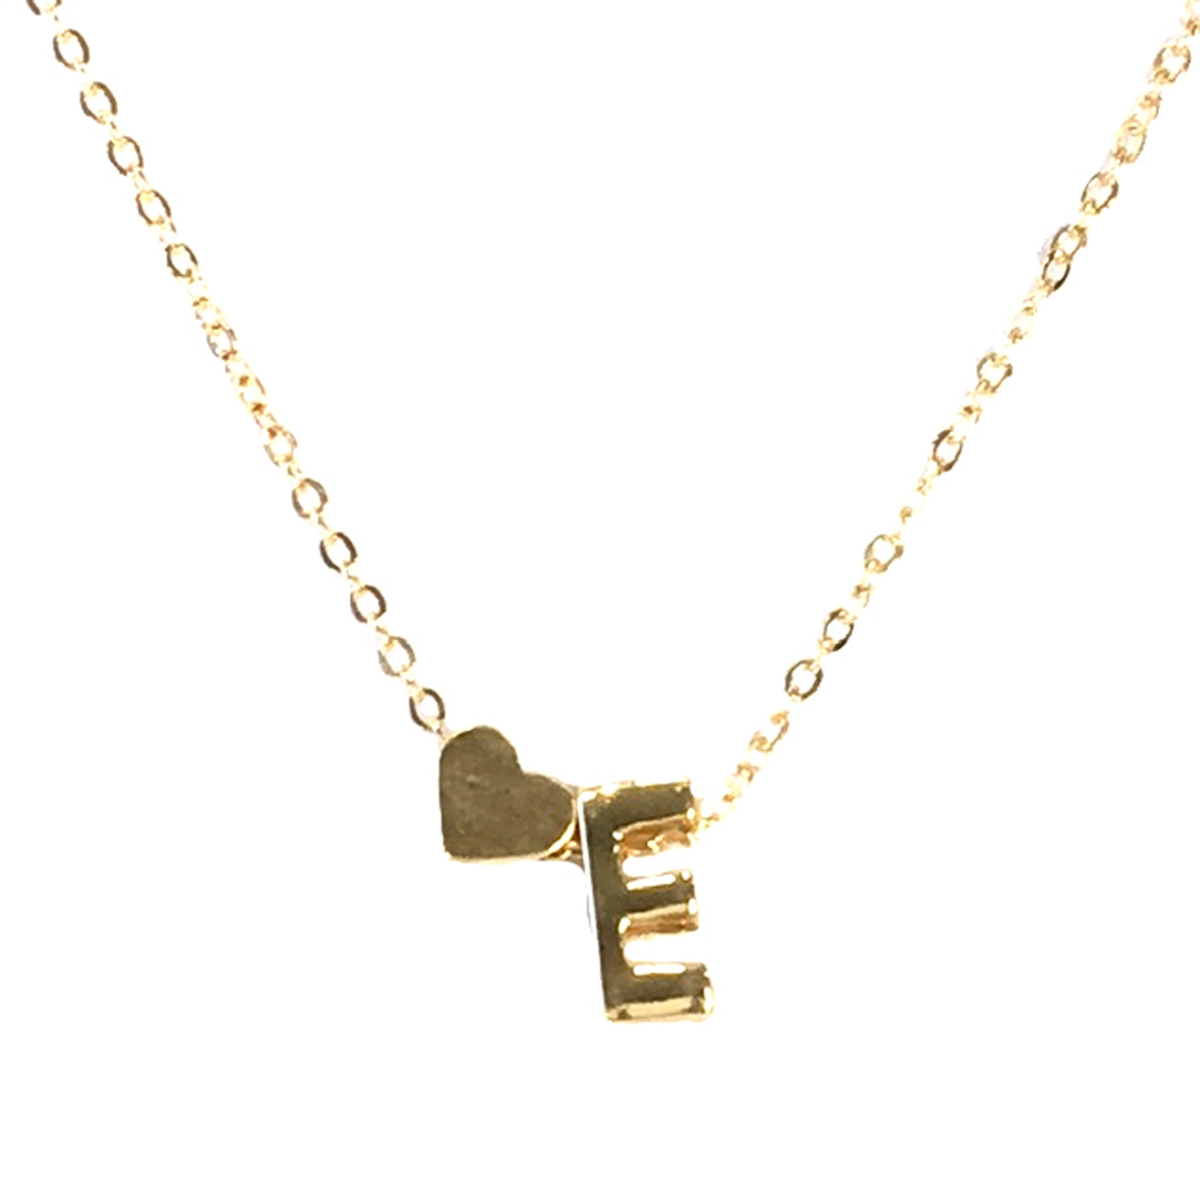 Stainless steel alphabet letter E necklace by SoCharm